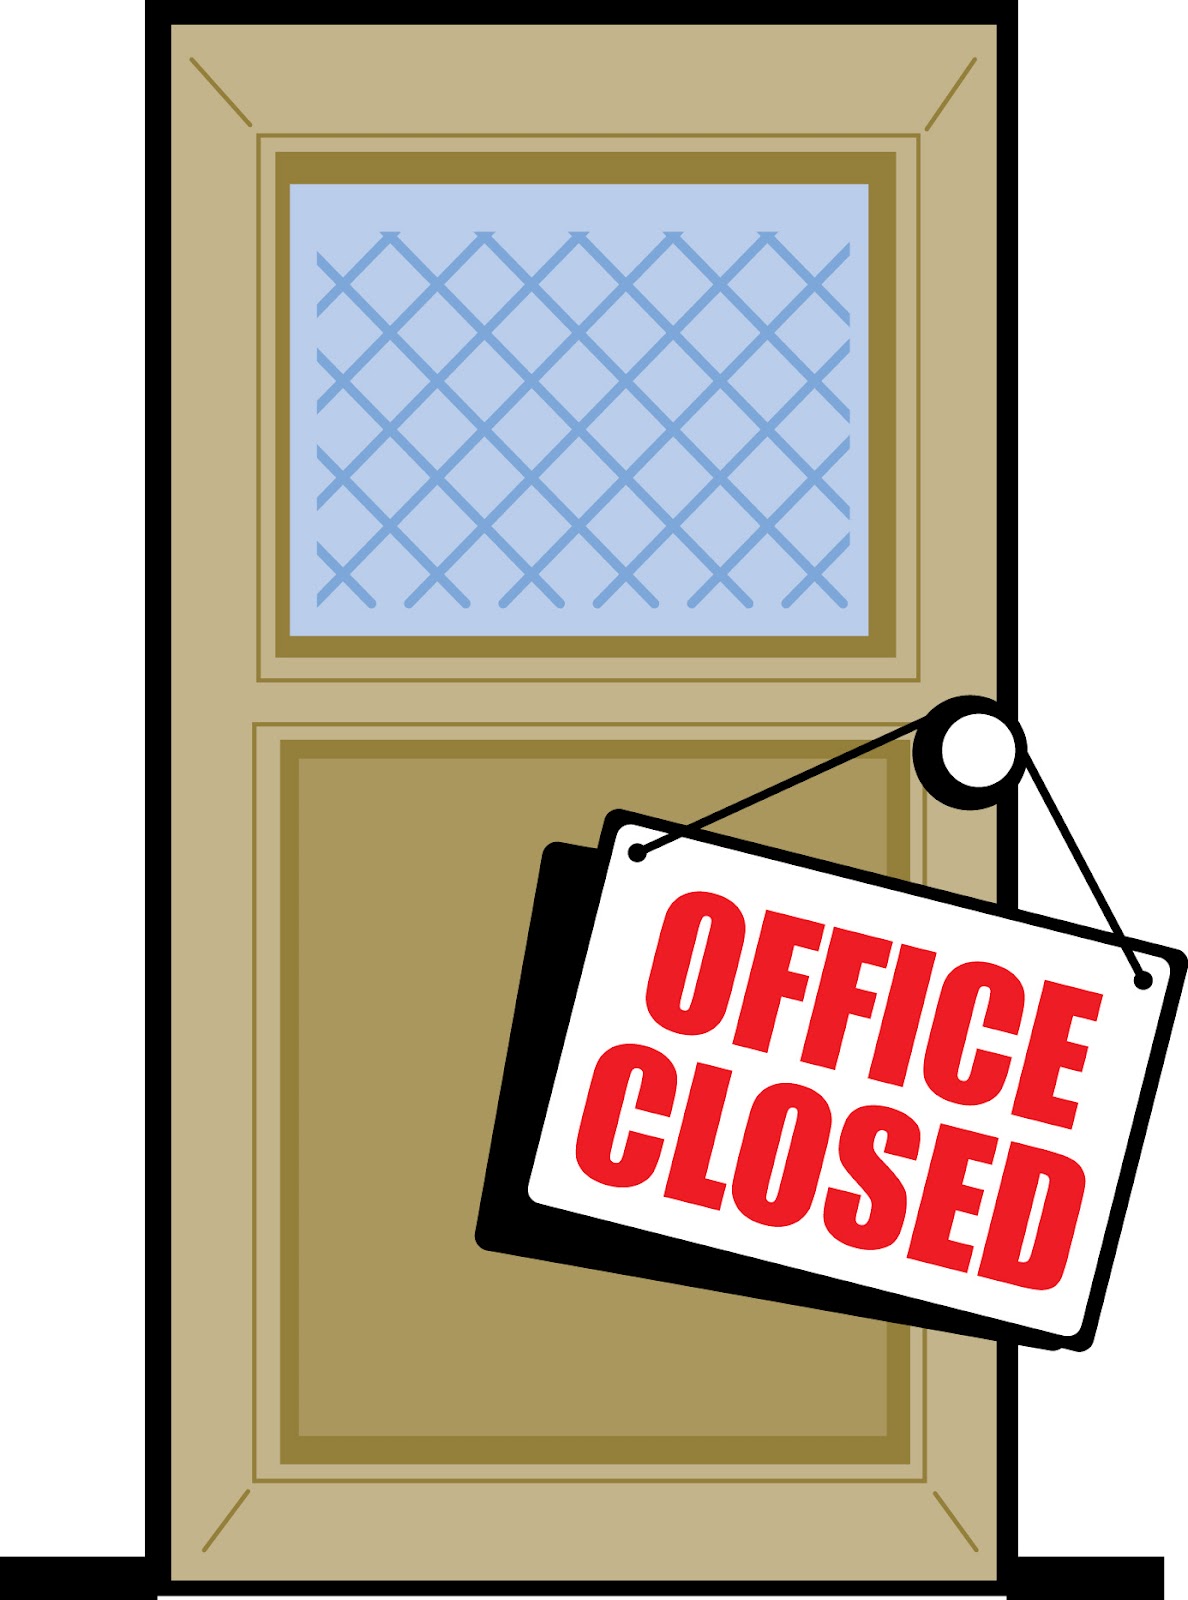 July 4th office closed dopho